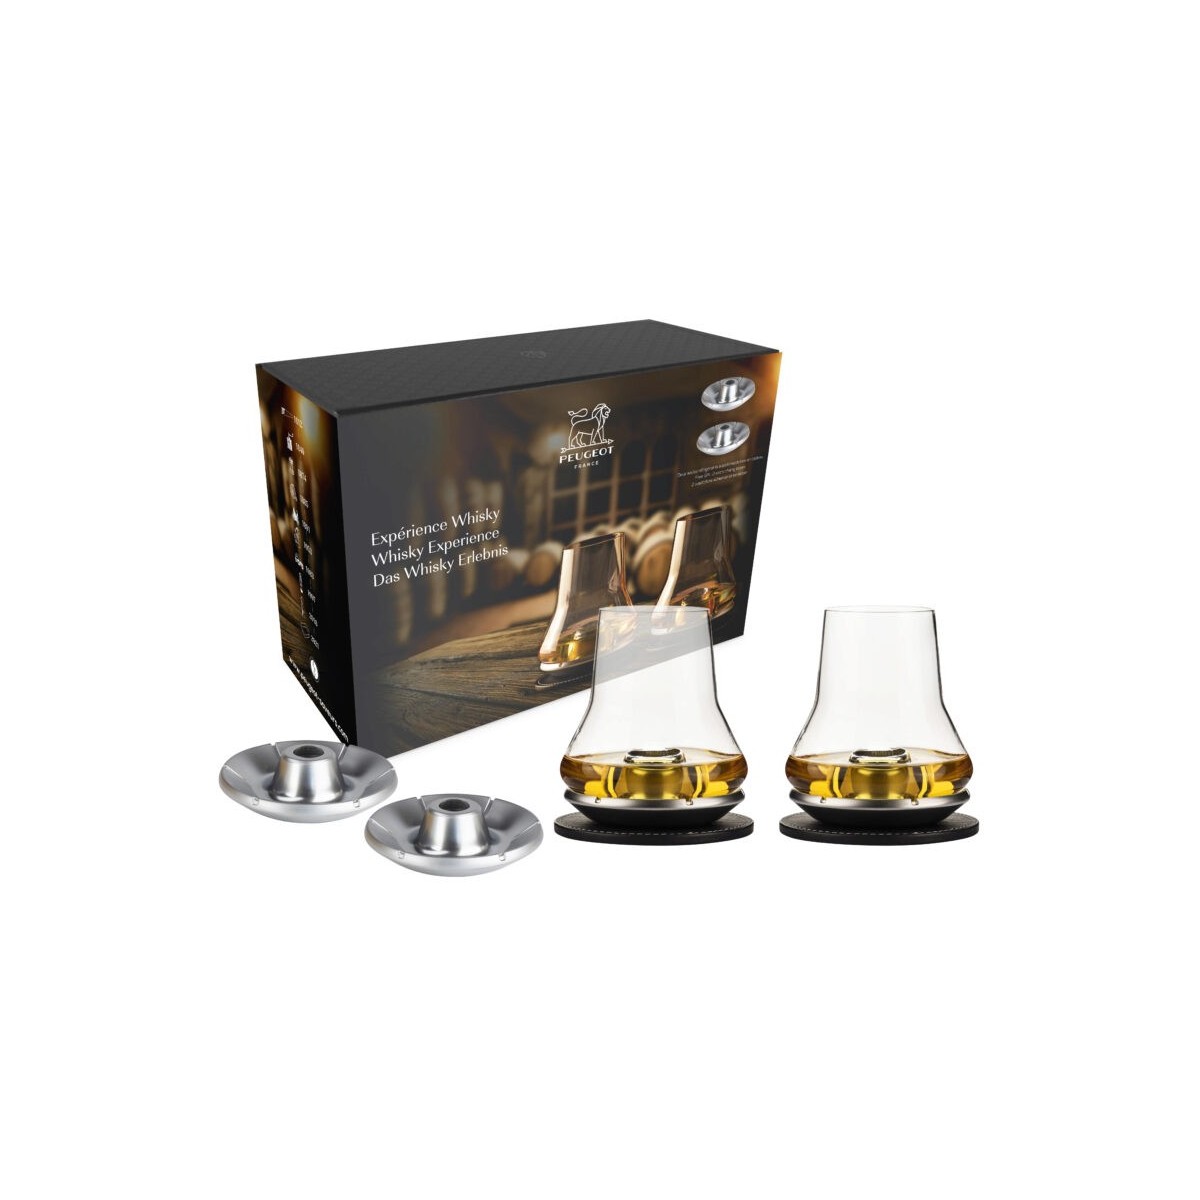 PEUGEOT COFFRET WHISKY EXPERIENCE 2 VERRES+4 BASESDE REFROIDISSEMENT CHROMEES